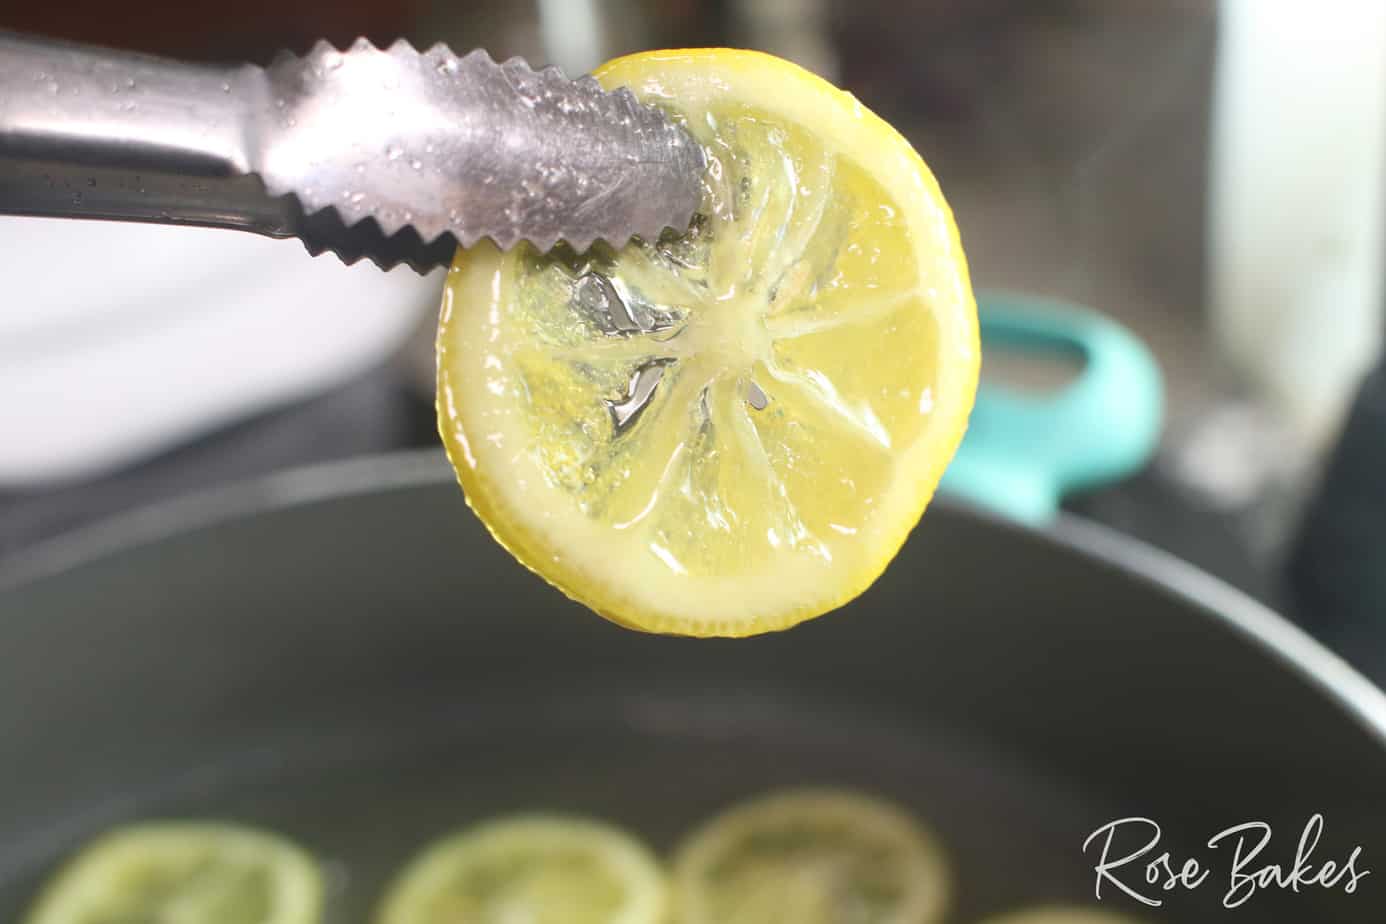 tongs holding lemon slices in a shallow pan of sugar water that is boiling